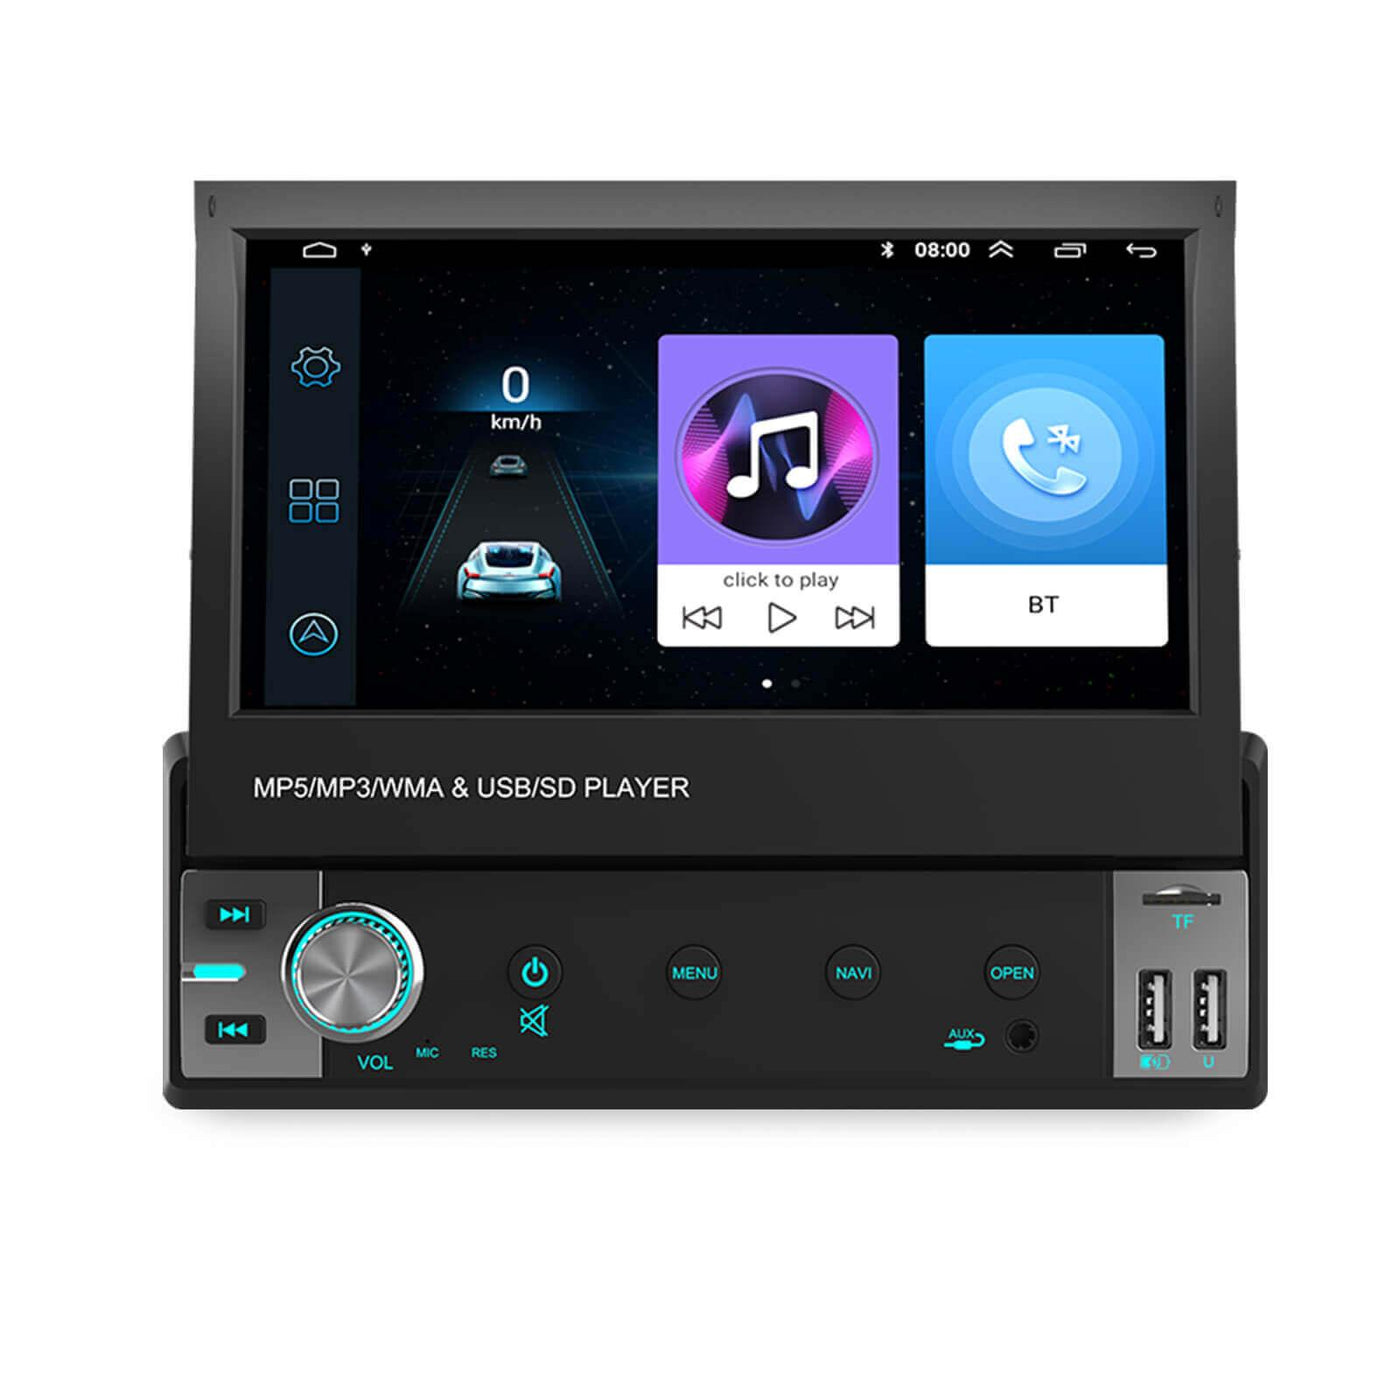 Radio Android Better 1 DIN - BT910 - Better Car Audio